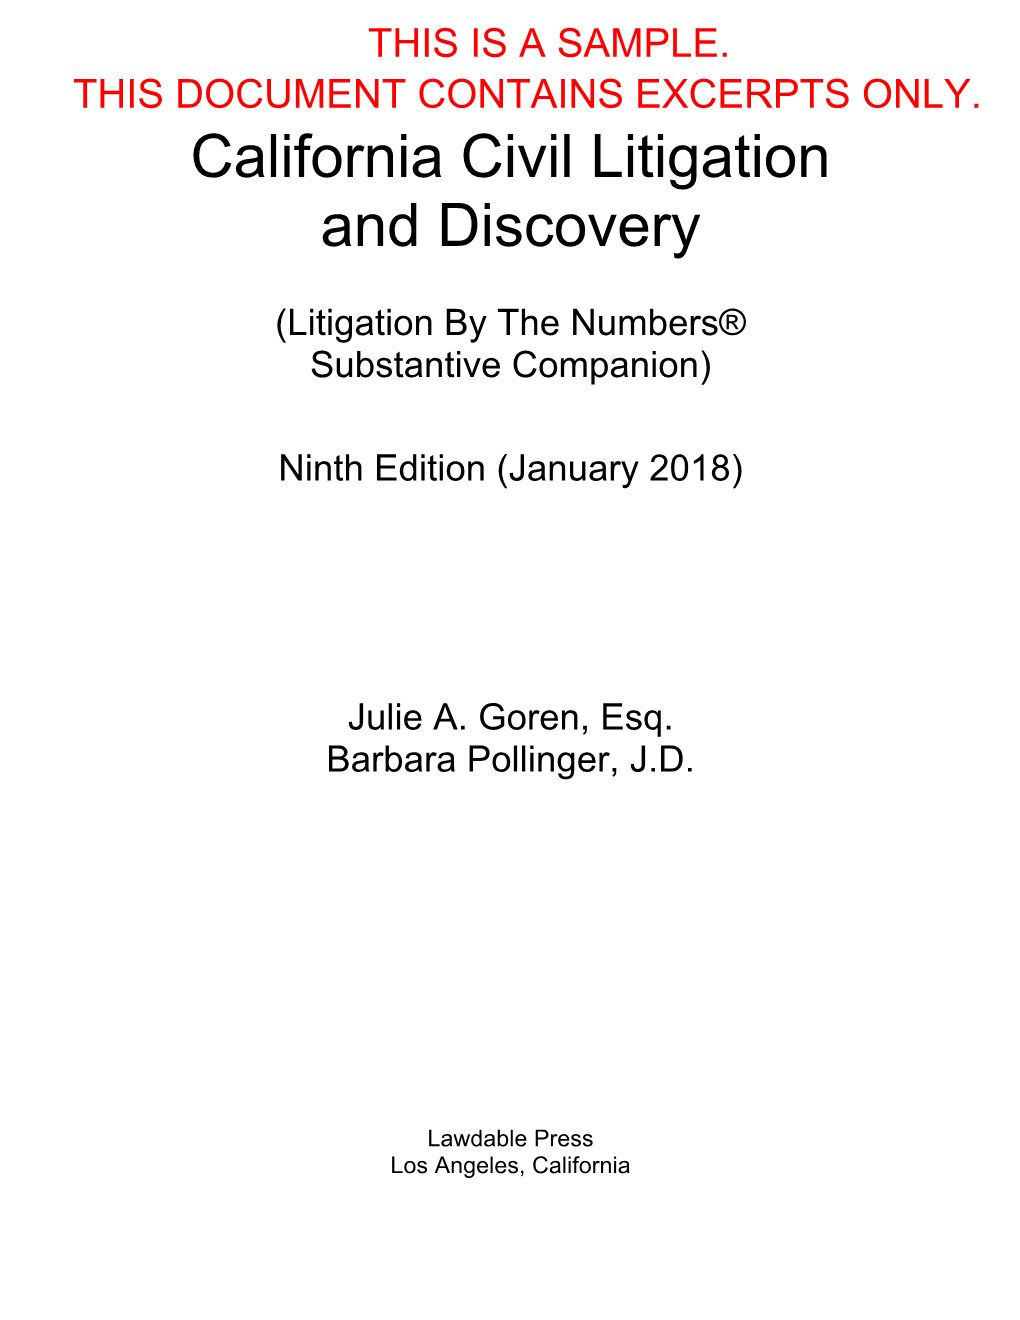 Excerpts from California Civil Litigation and Discovery